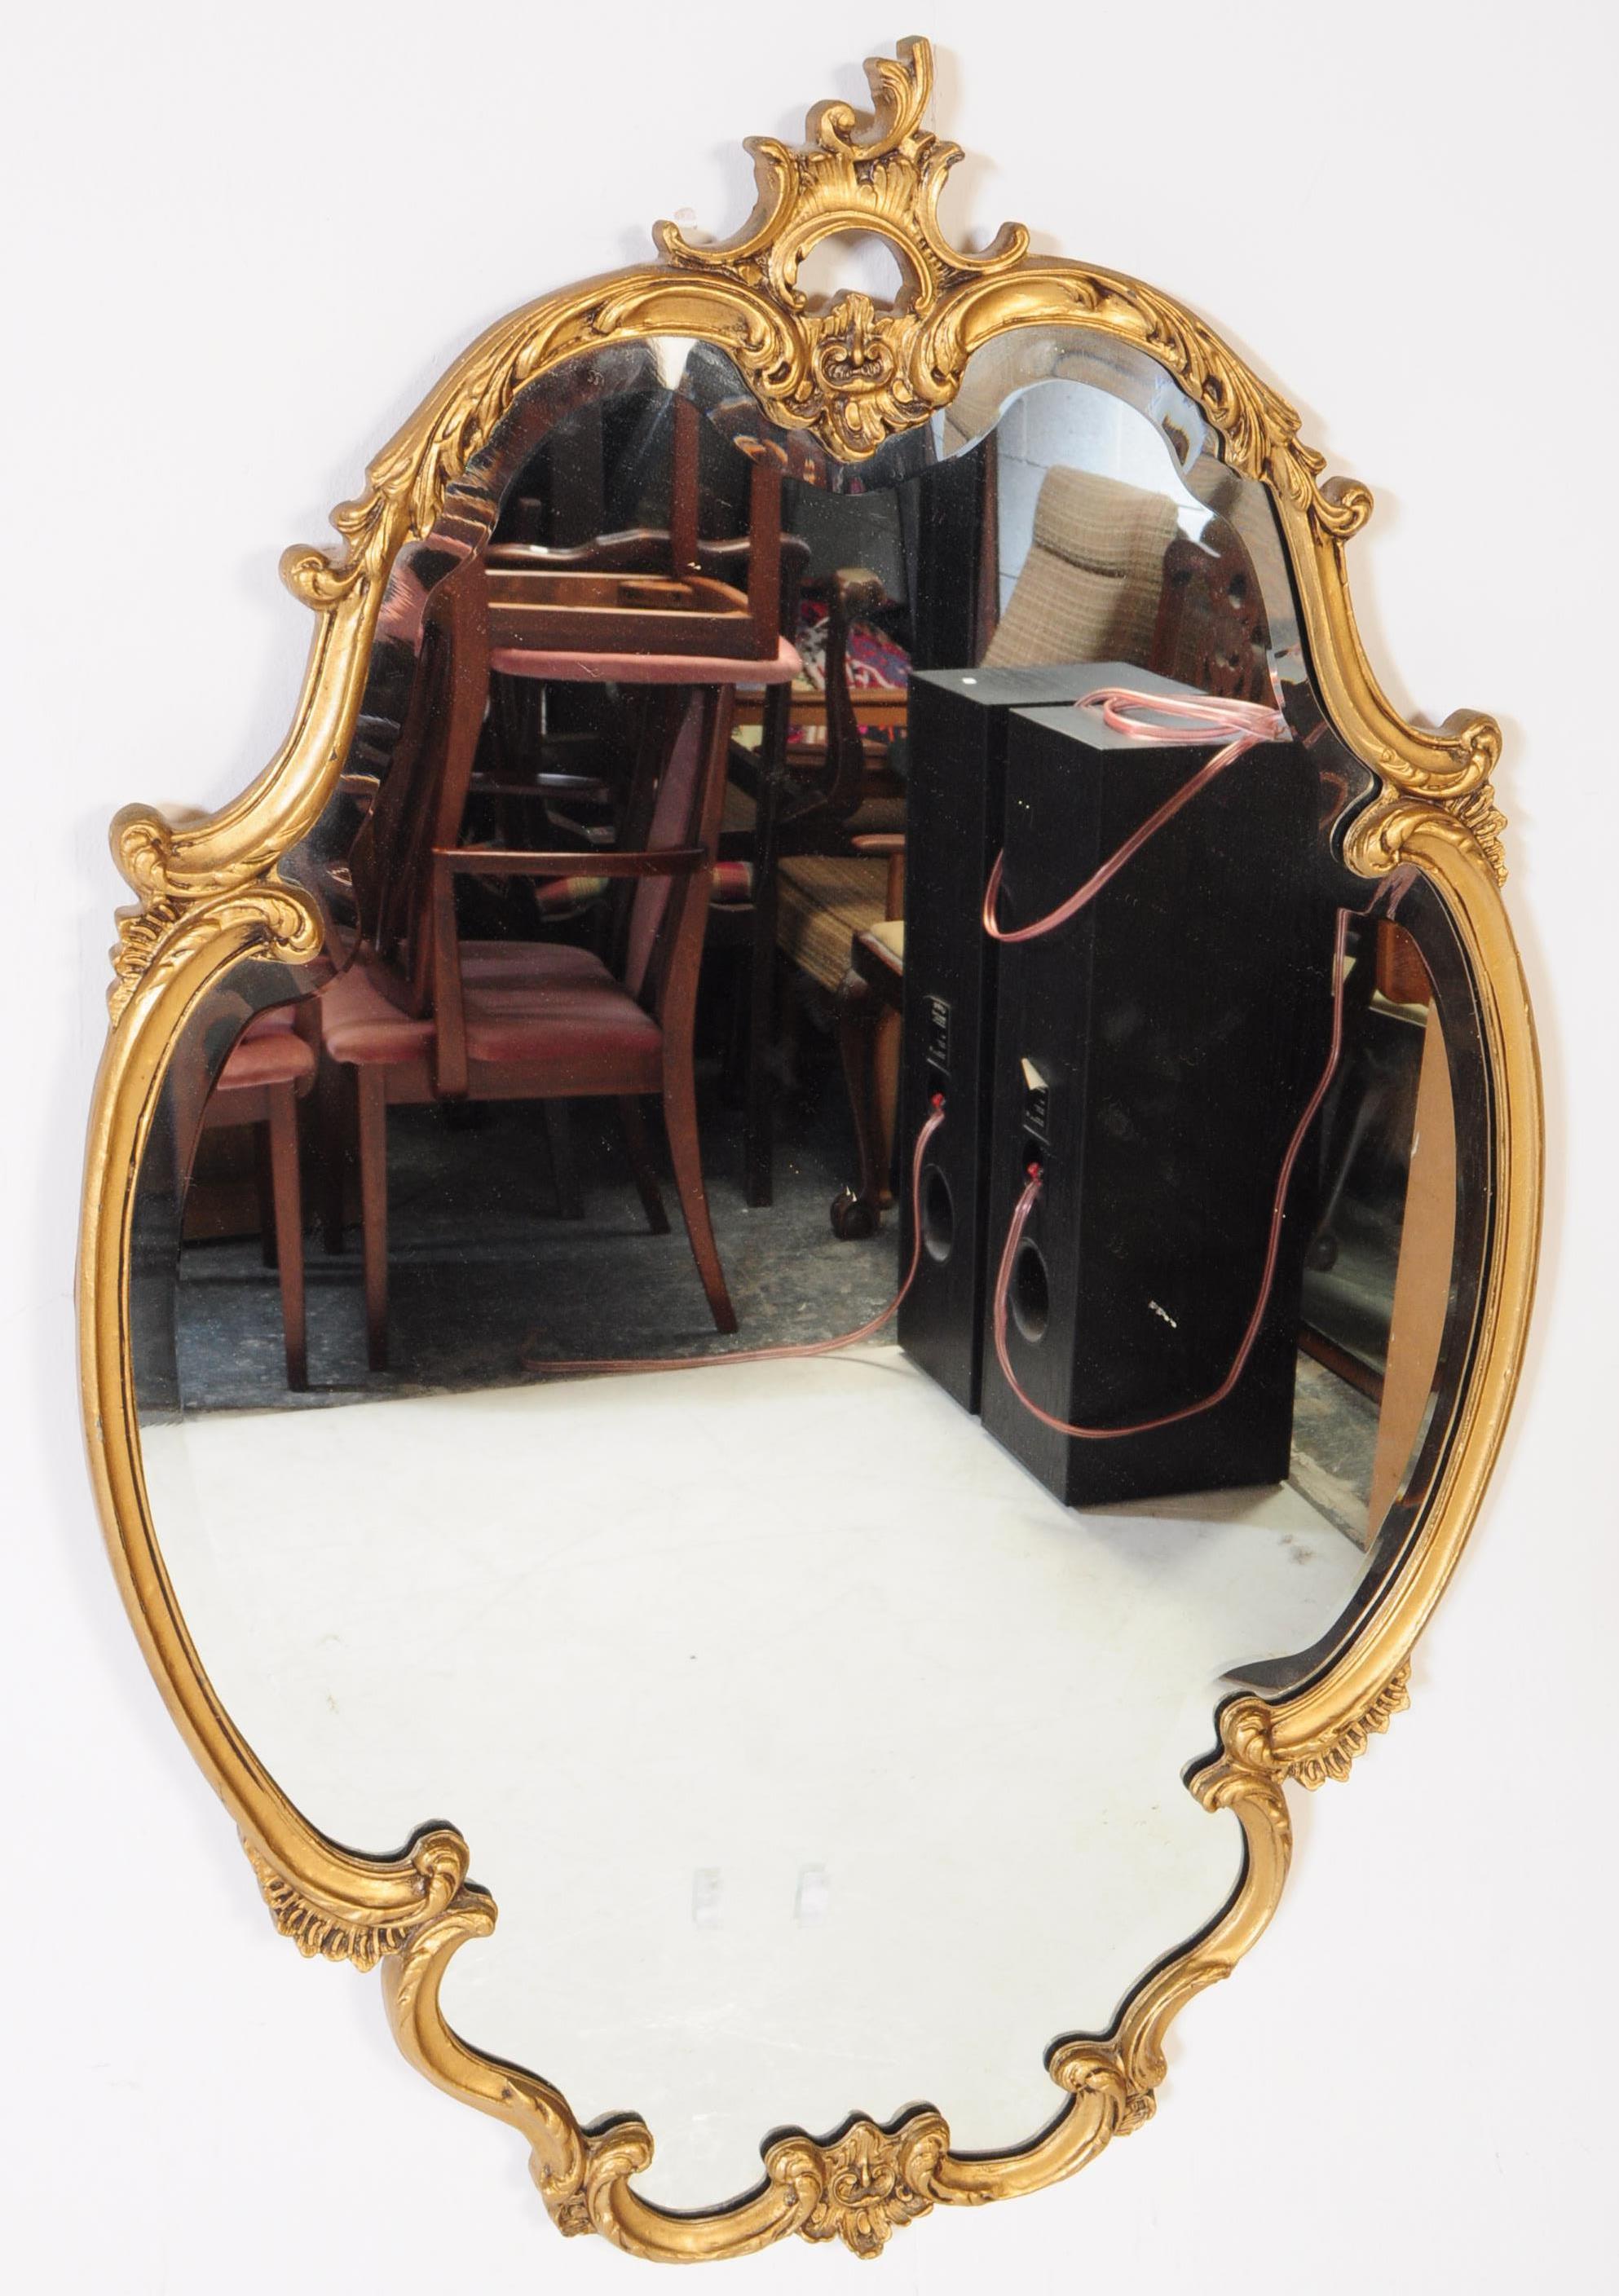 TWO VINTAGE 20TH CENTURY ORNATE GILT FRAME WALL MIRRORS - Image 5 of 7